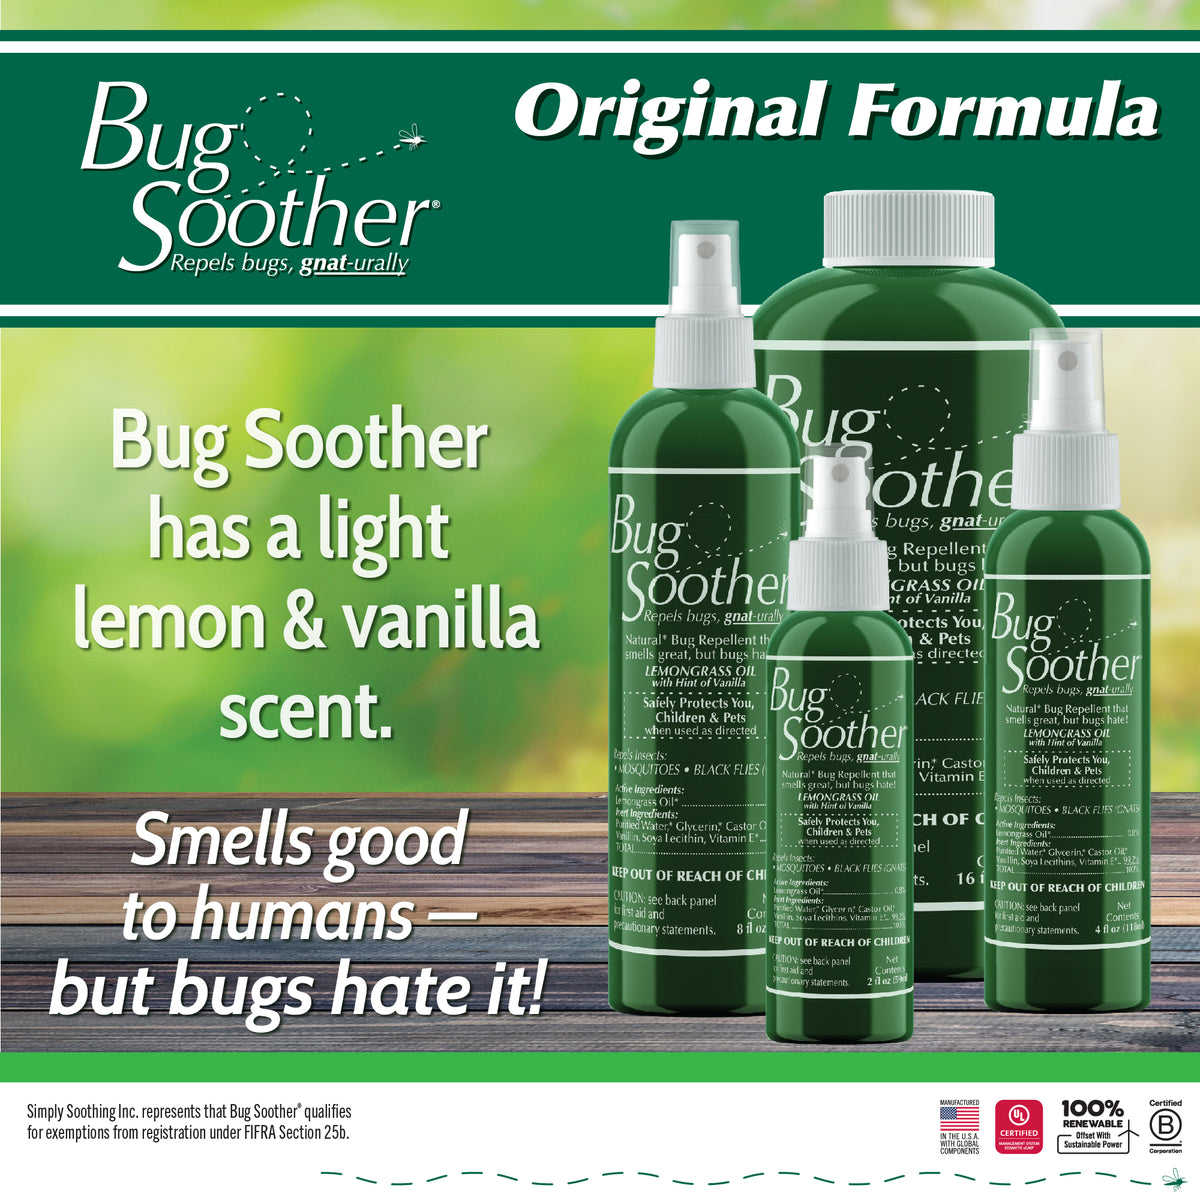 Bug Soother Insect Repellent Spray Packs